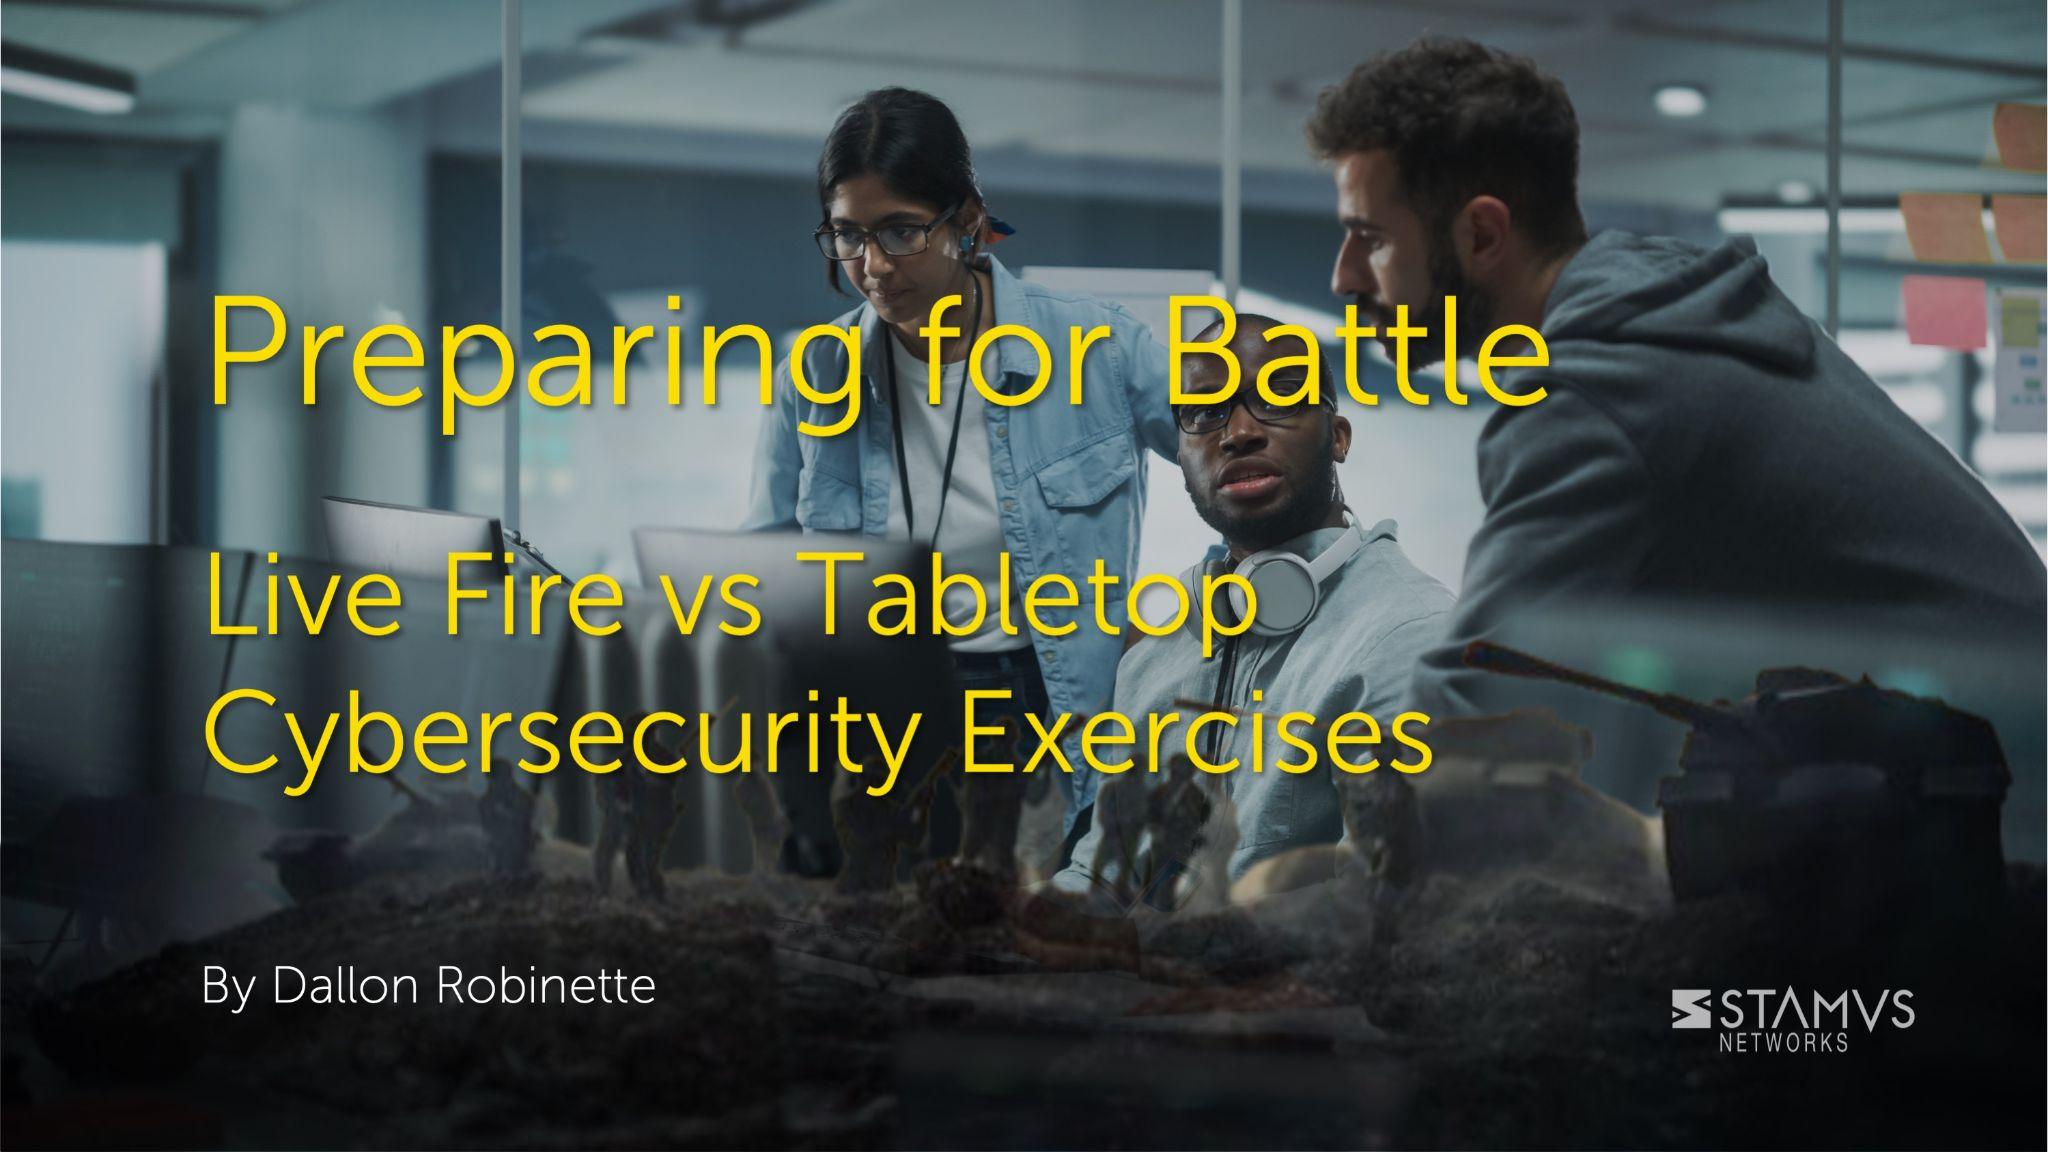 Ready for Battle? Live Fire vs Tabletop Cybersecurity Exercises